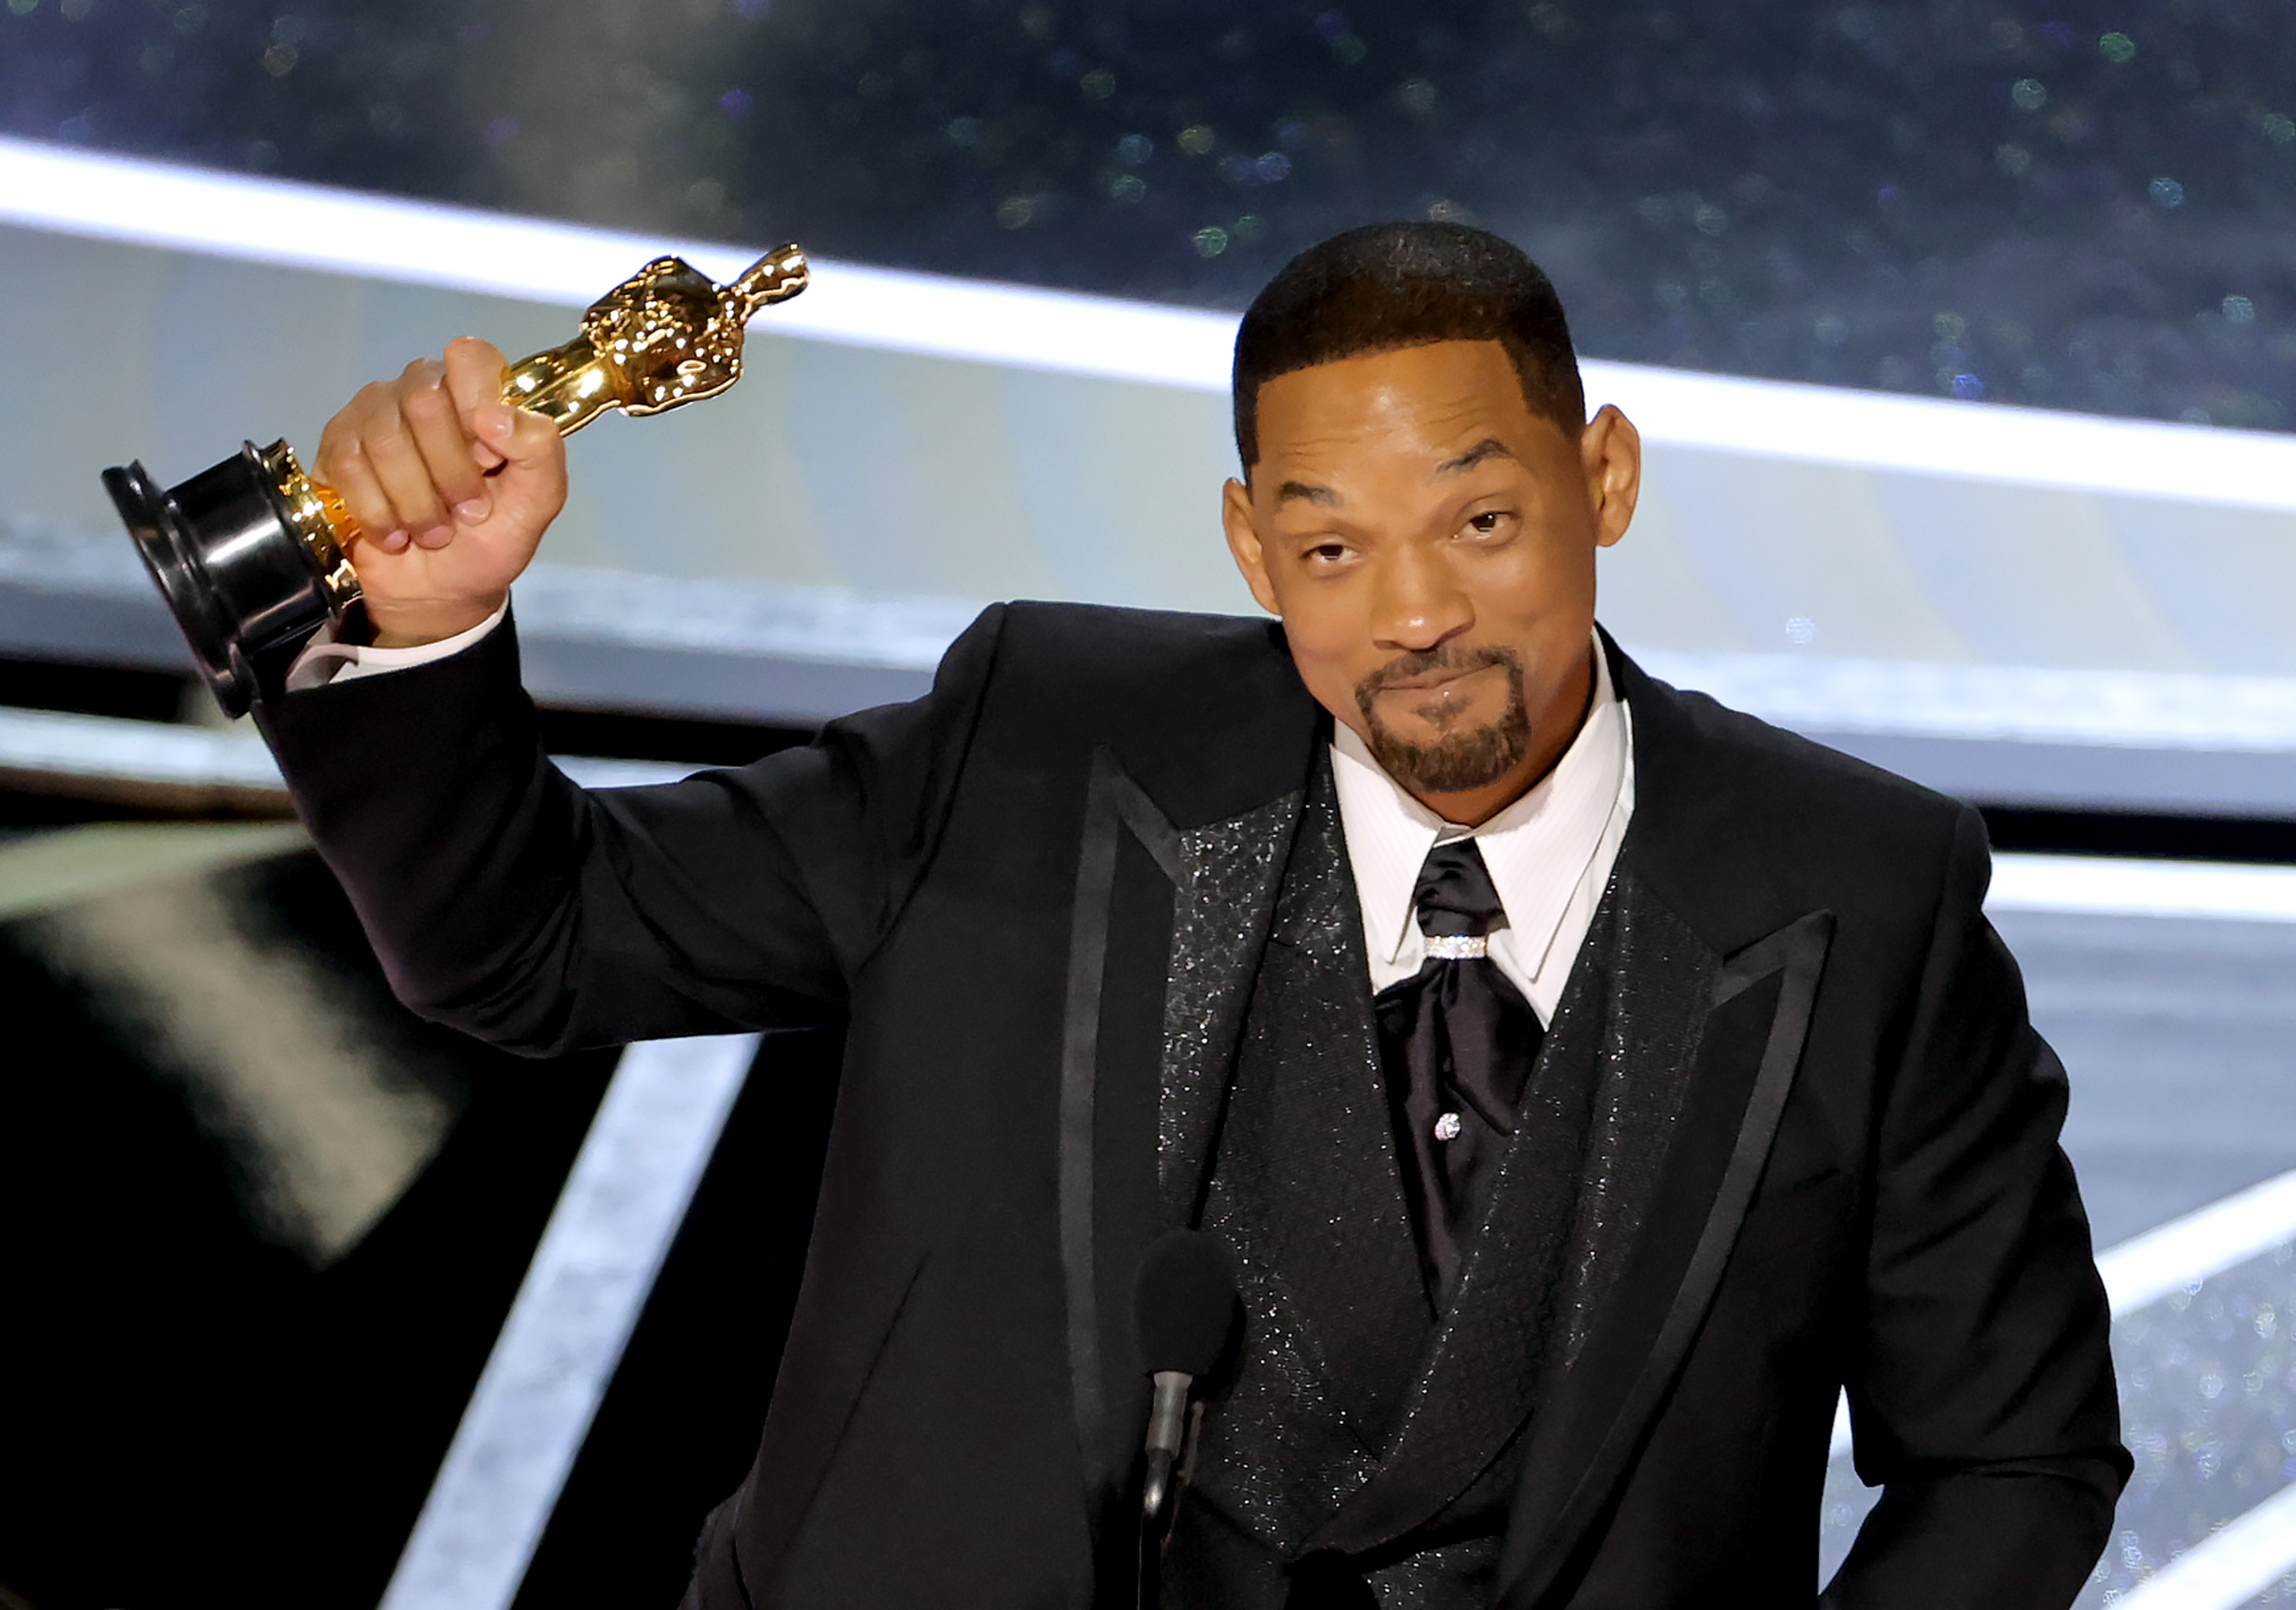 Will Smith Opens Up About Oscar’s Slap: “Hurt People Hurt People”